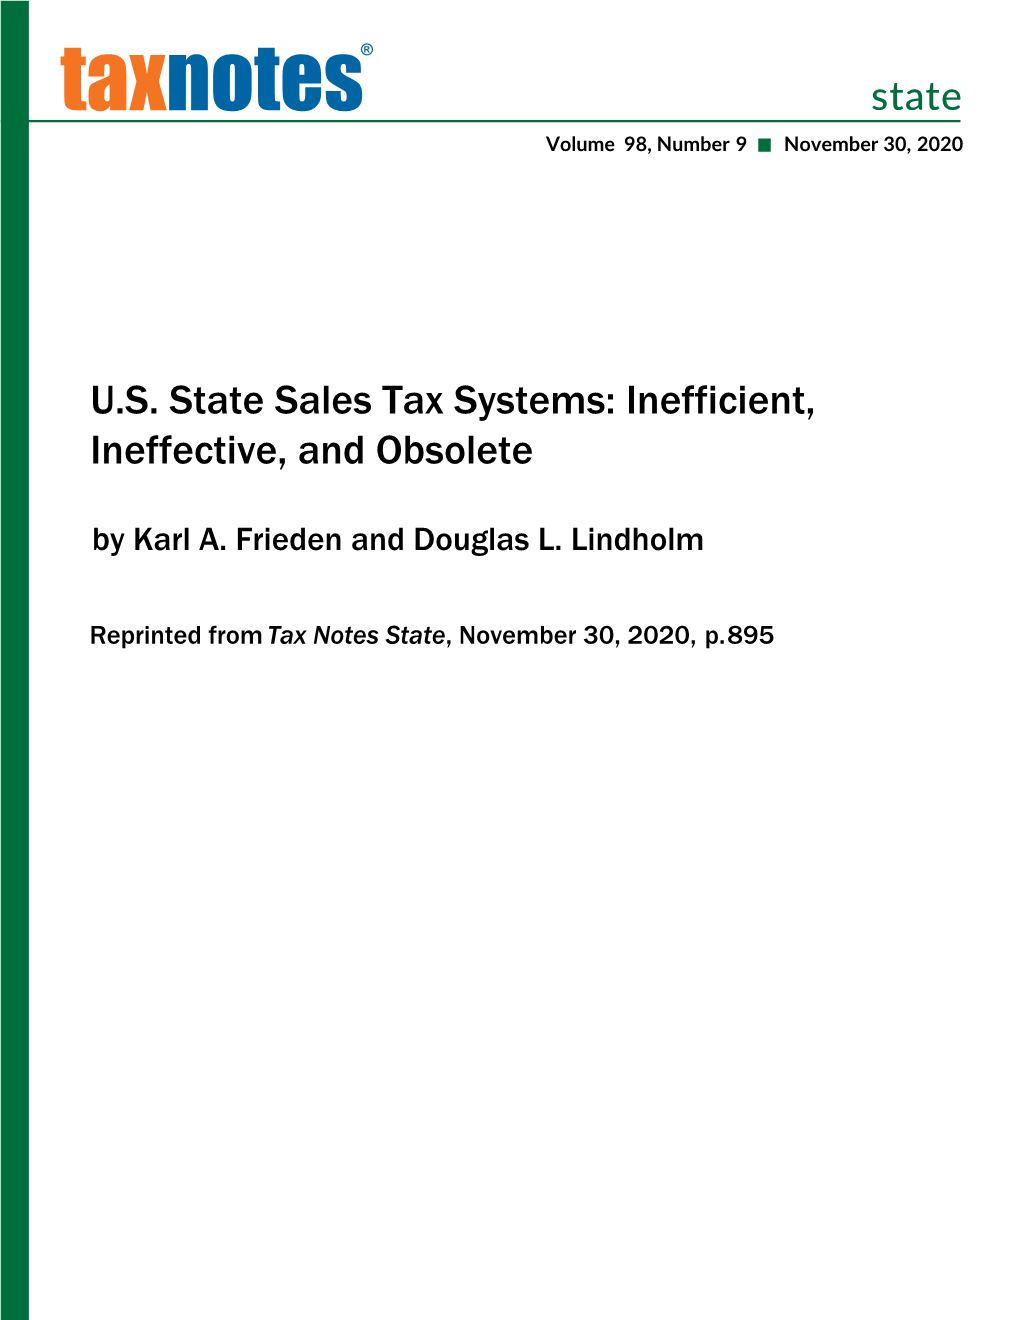 US State Sales Tax Systems